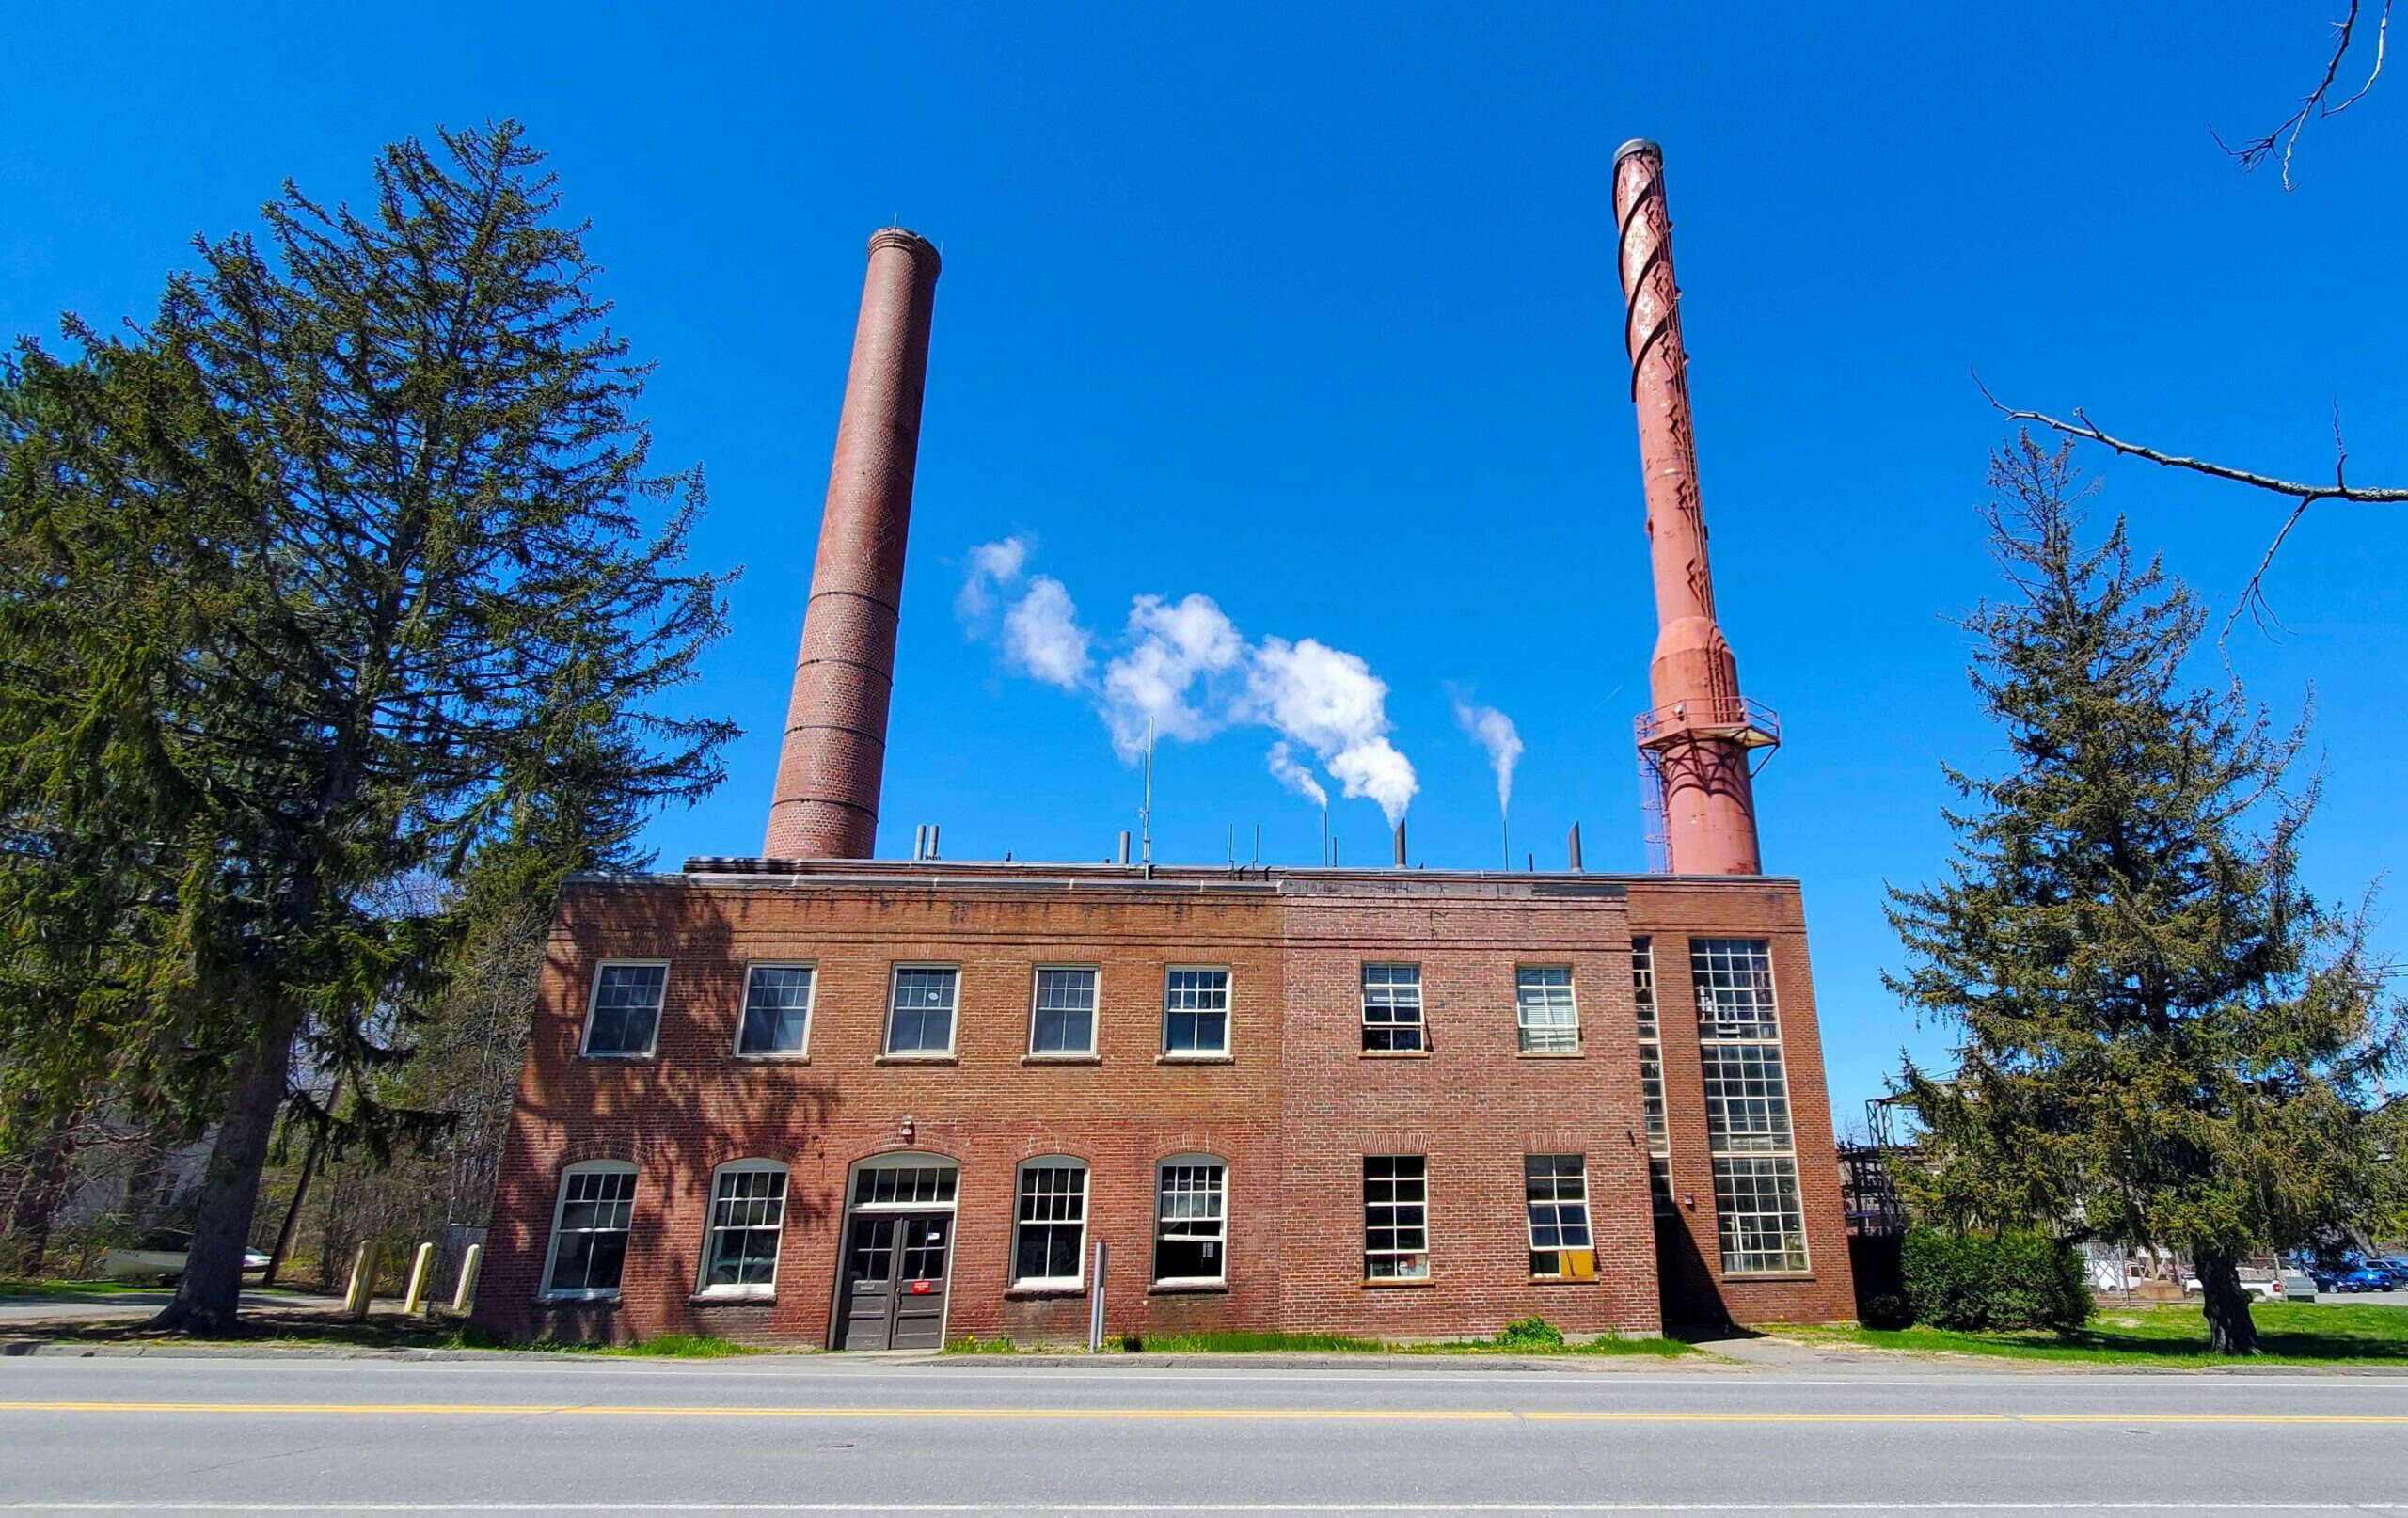 old brick building with two chimneys